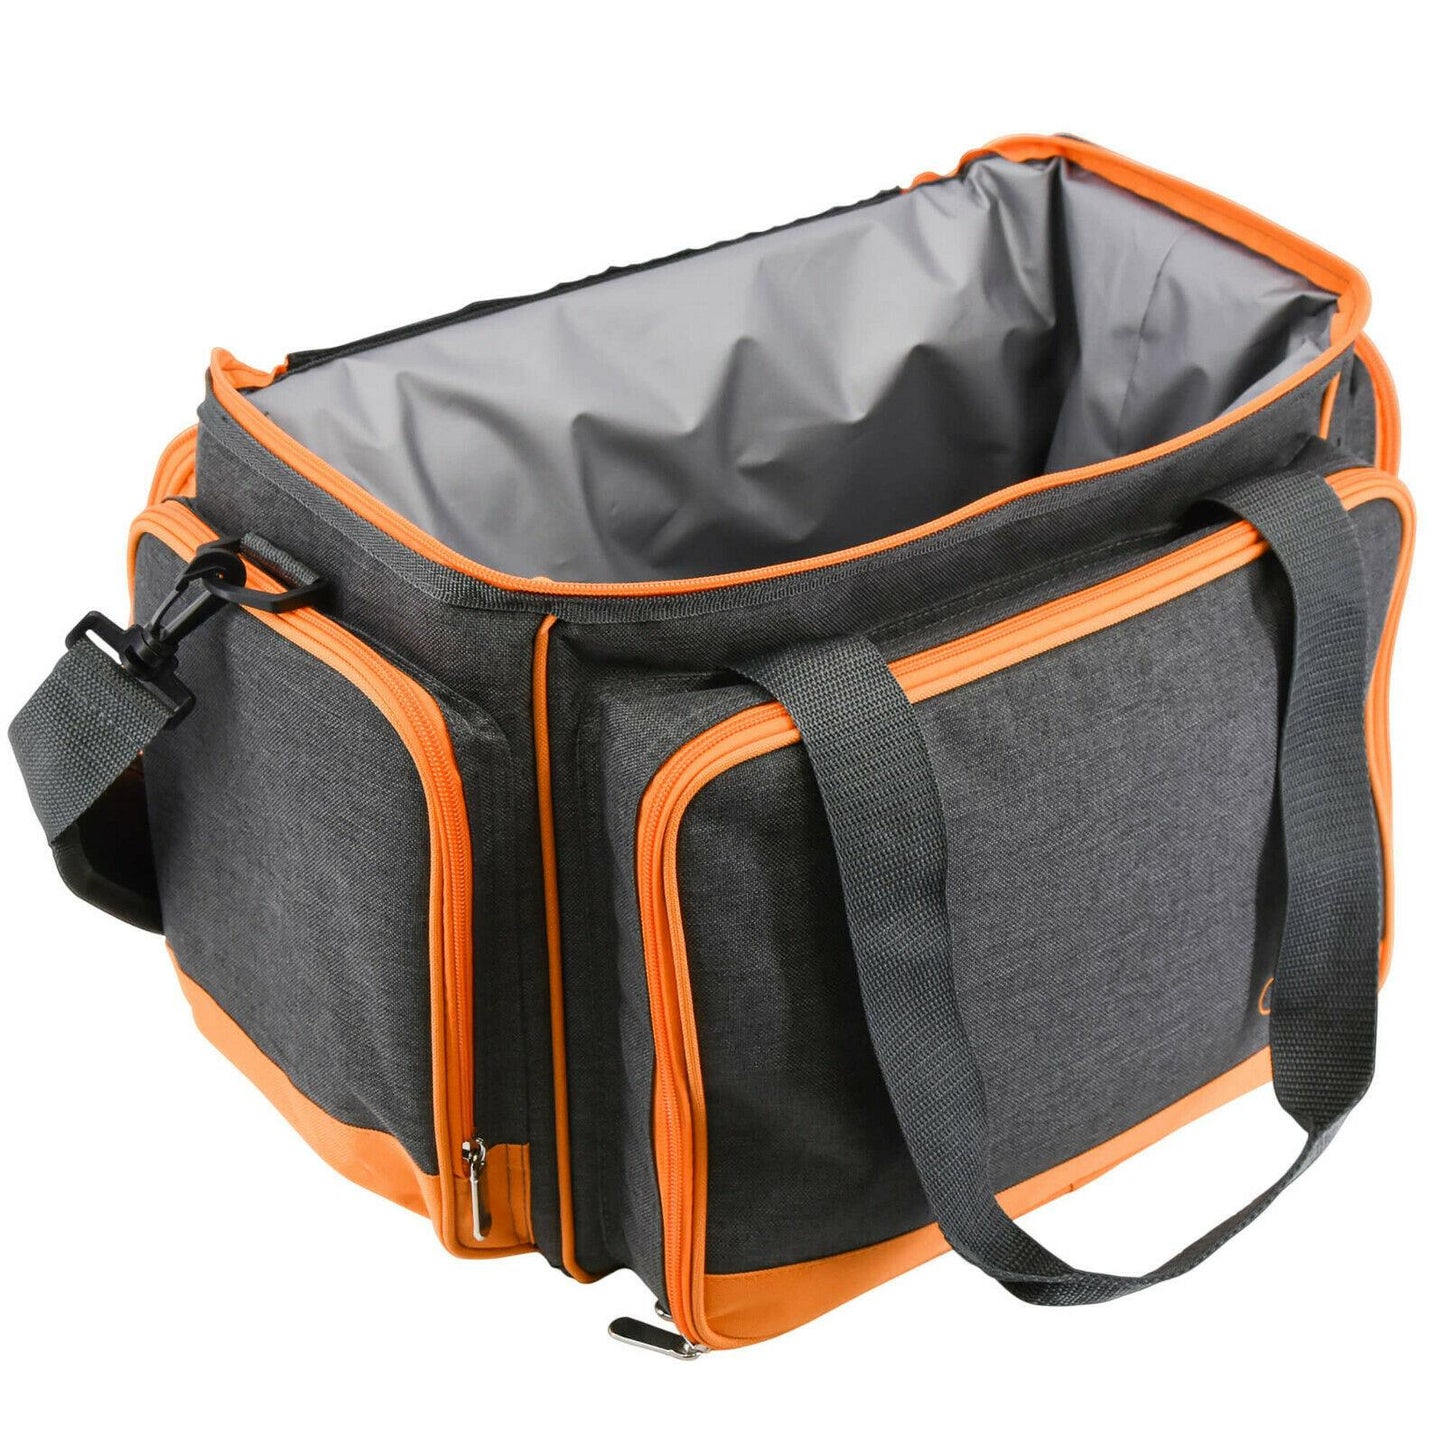 4 Person Insulated Shoulder Bag by Geezy - UKBuyZone